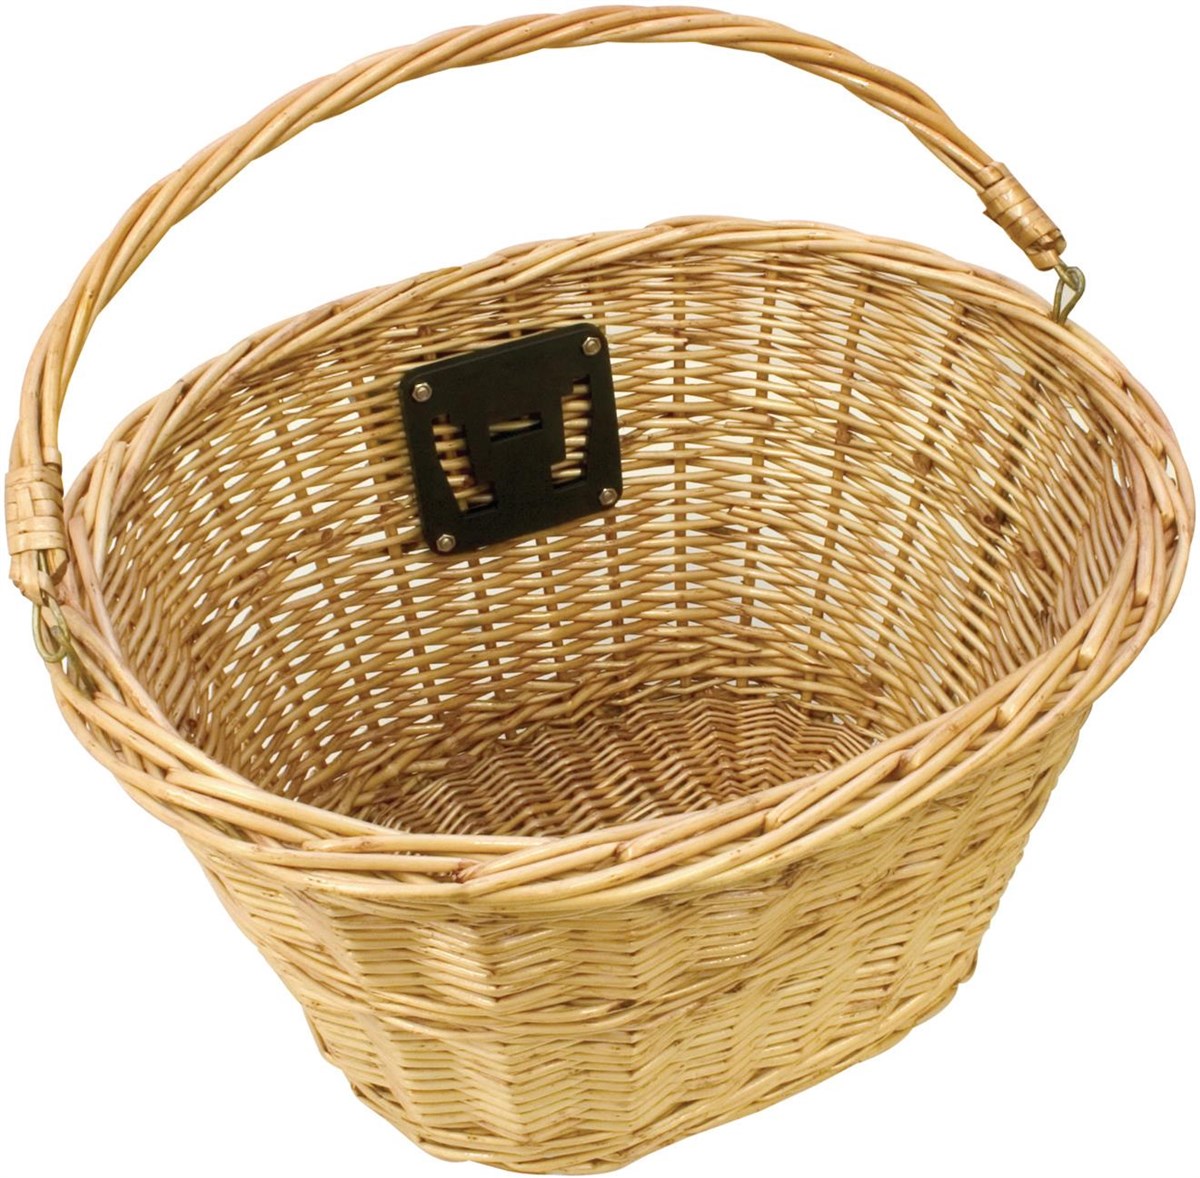 ETC Wicker Basket with Quick Release Bracket product image